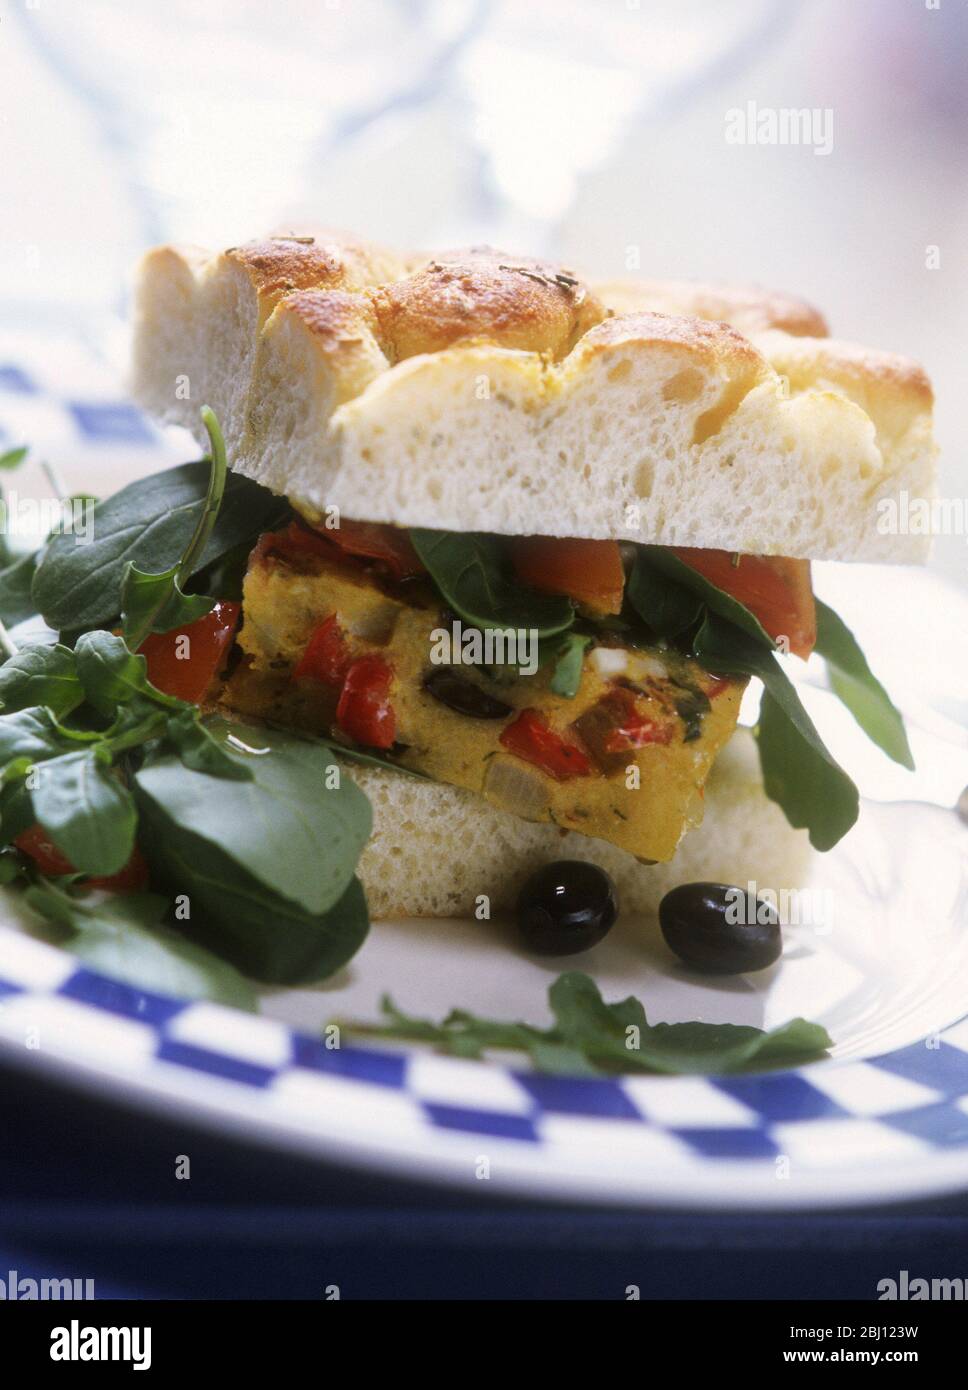 Sandwich of spanish omelette (frittata) in foccacia bread with rocket salad and black olives - Stock Photo